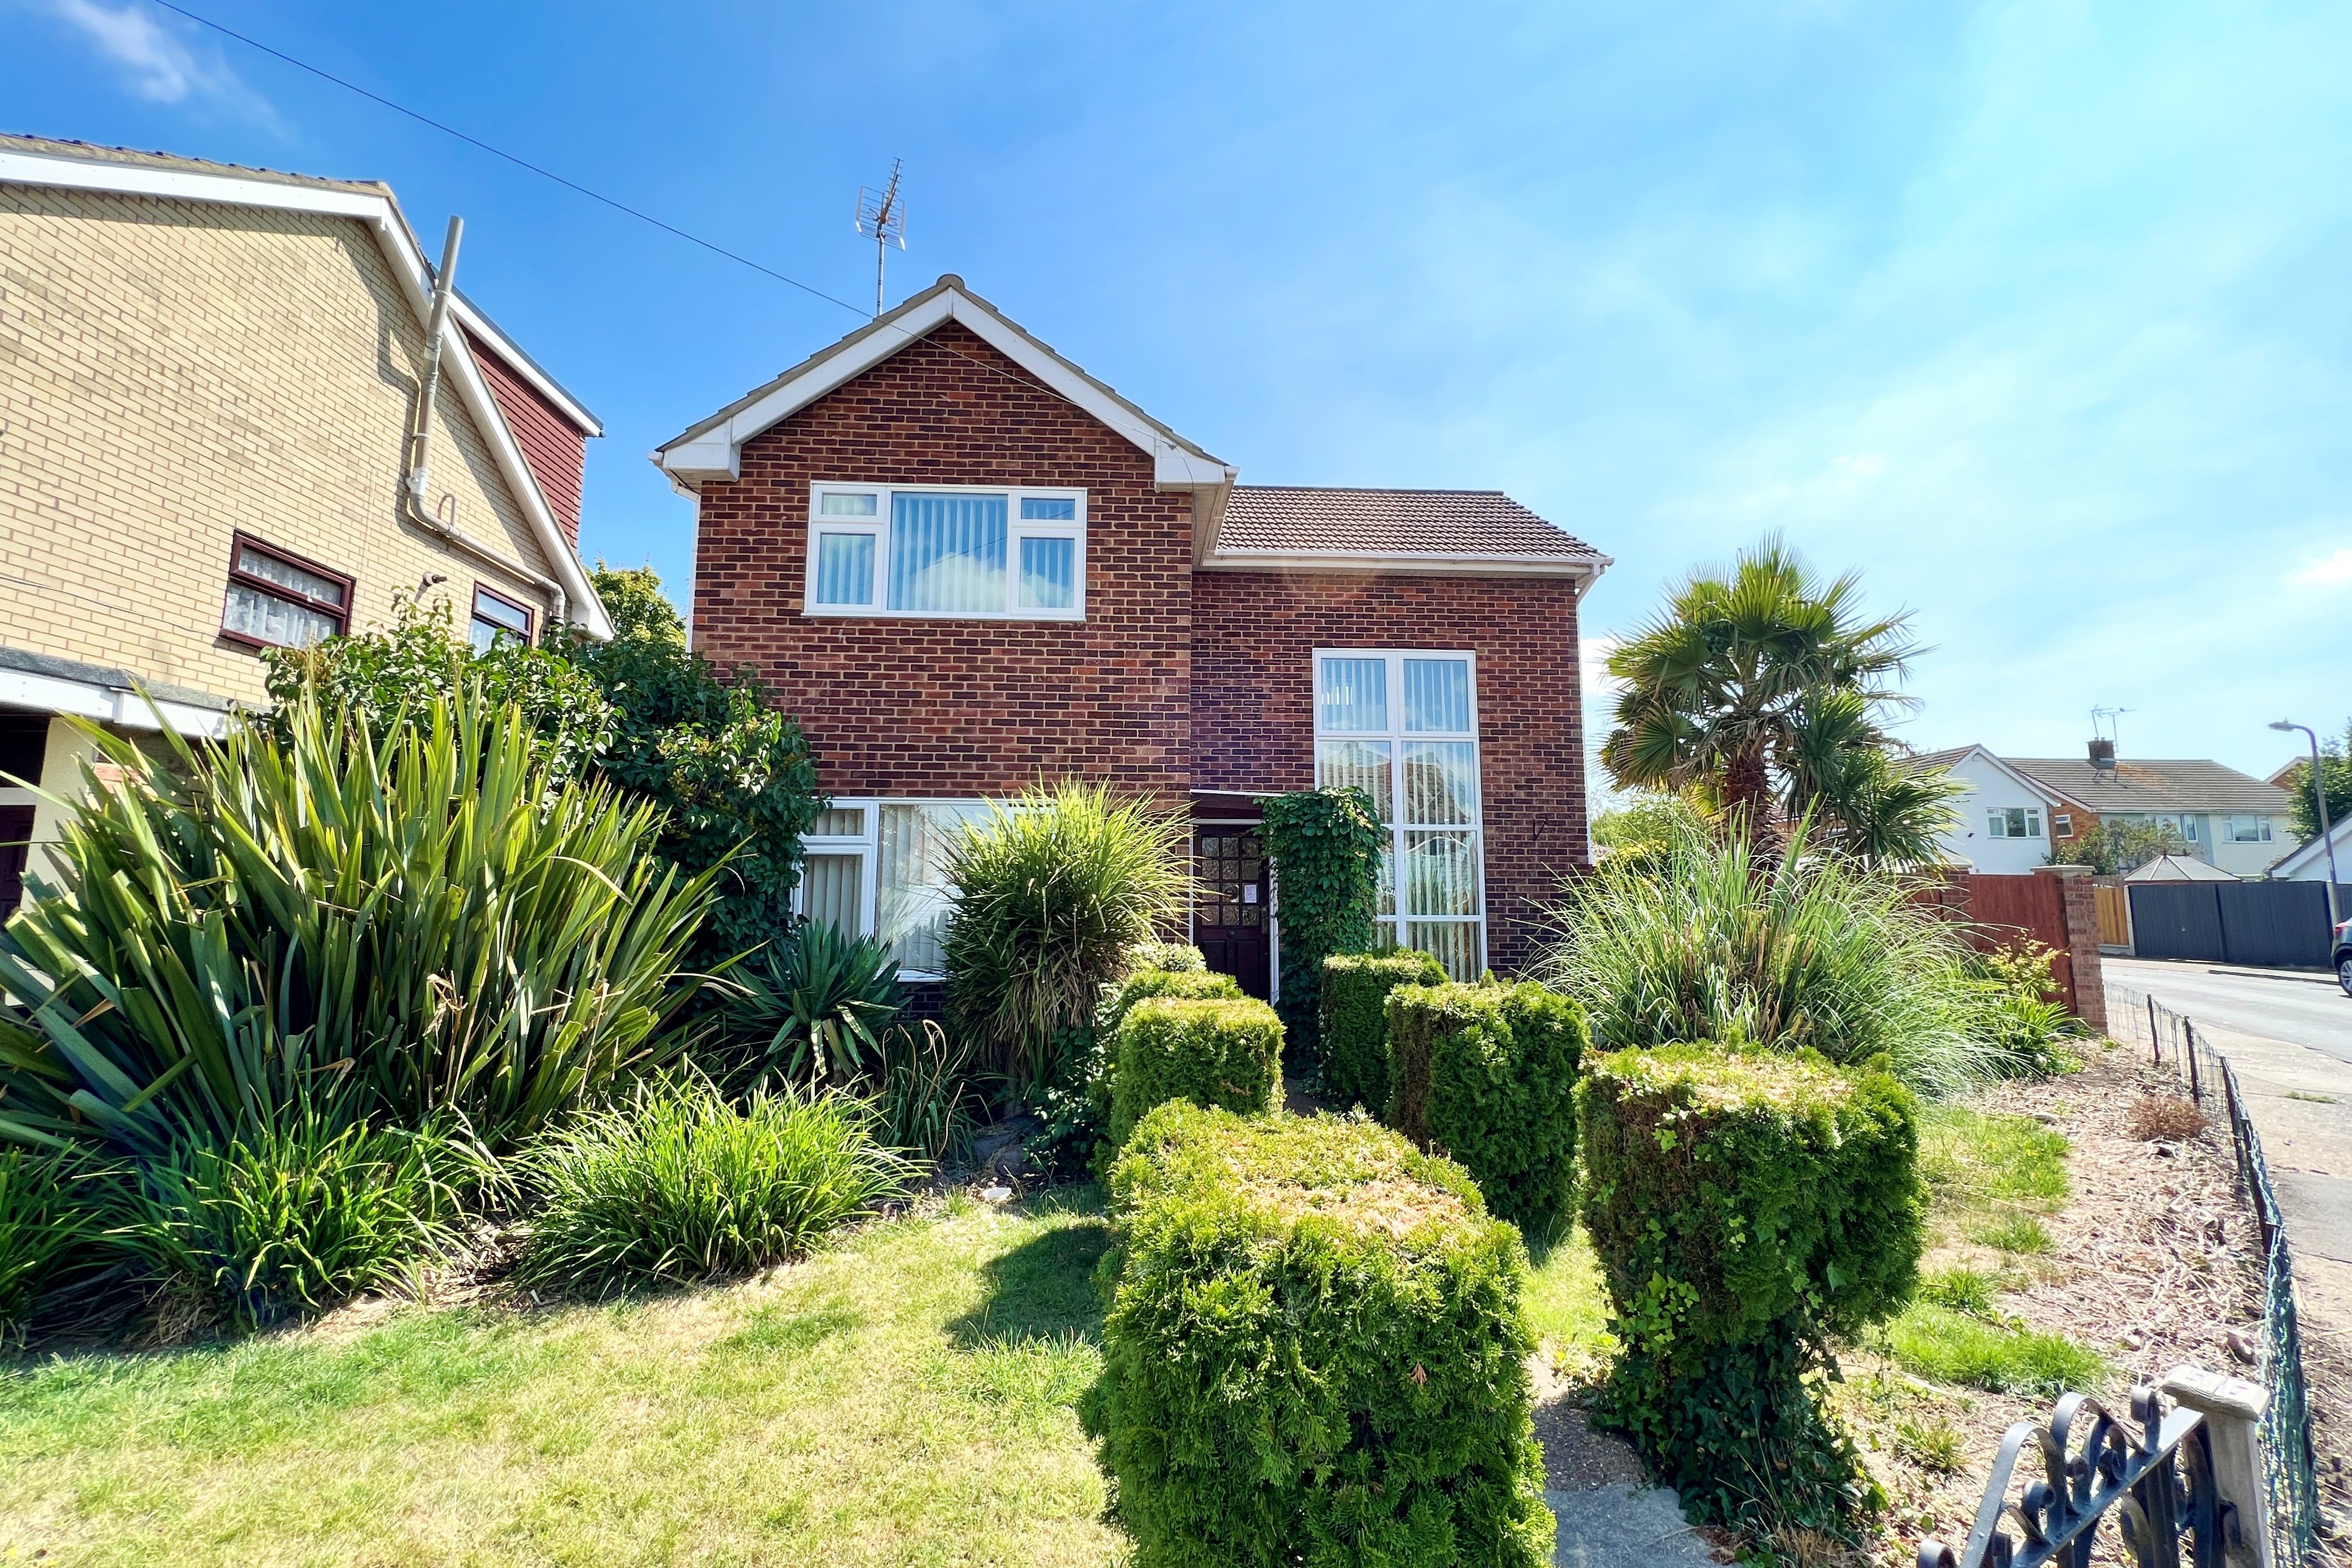 3 bed detached house to rent in Fairview Crescent, Benfleet , SS7 